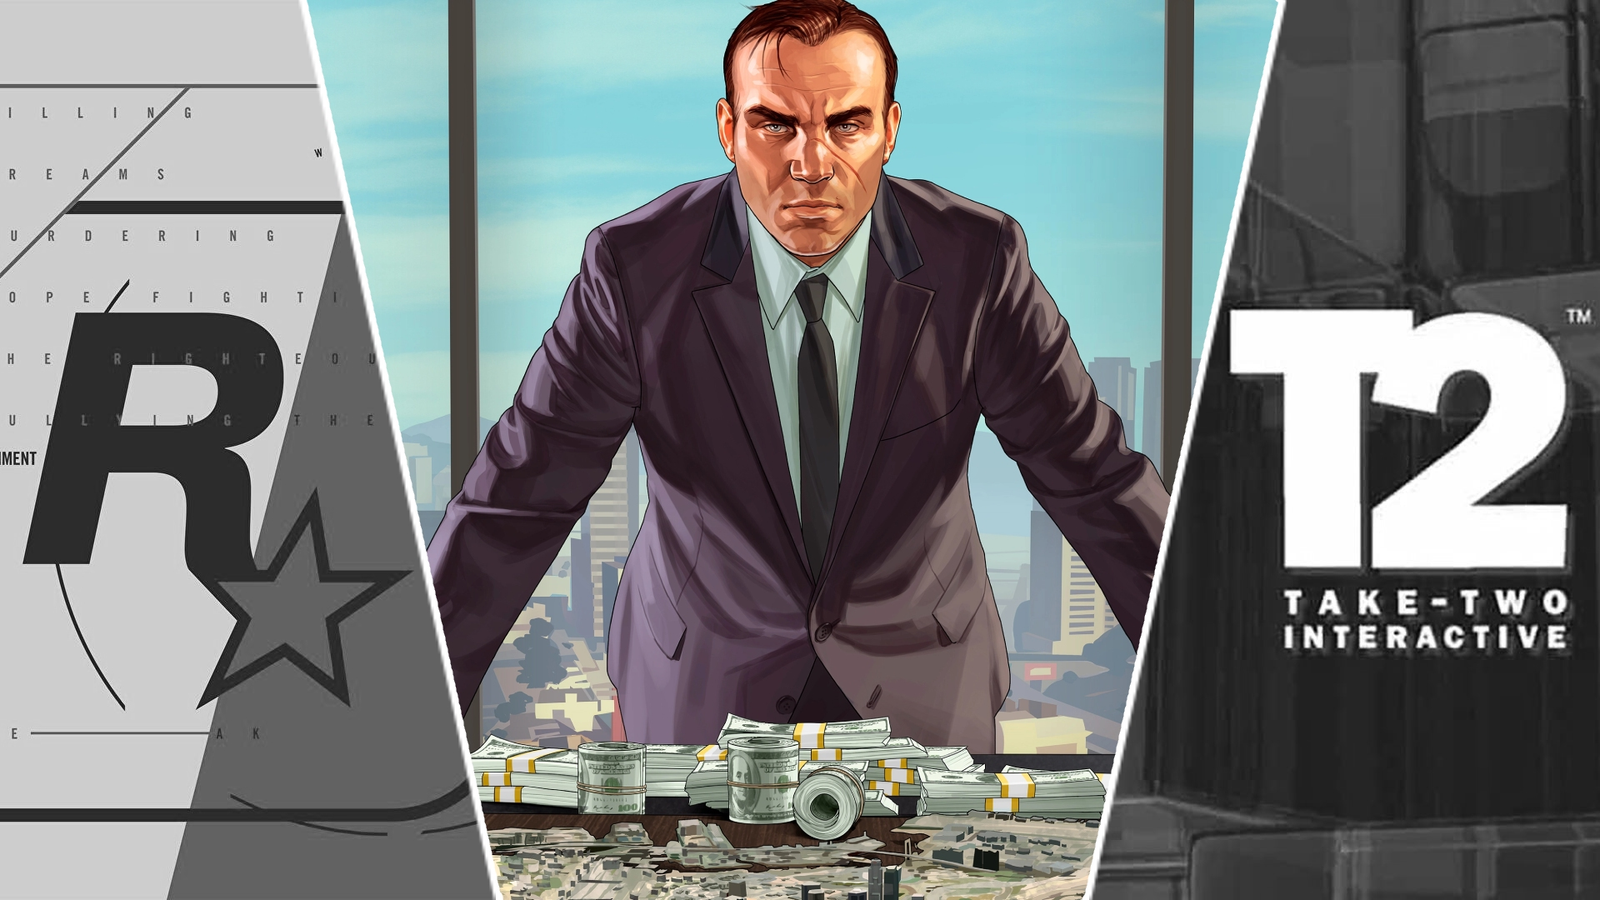 GTA 6: What we know about Rockstar's next crime adventure